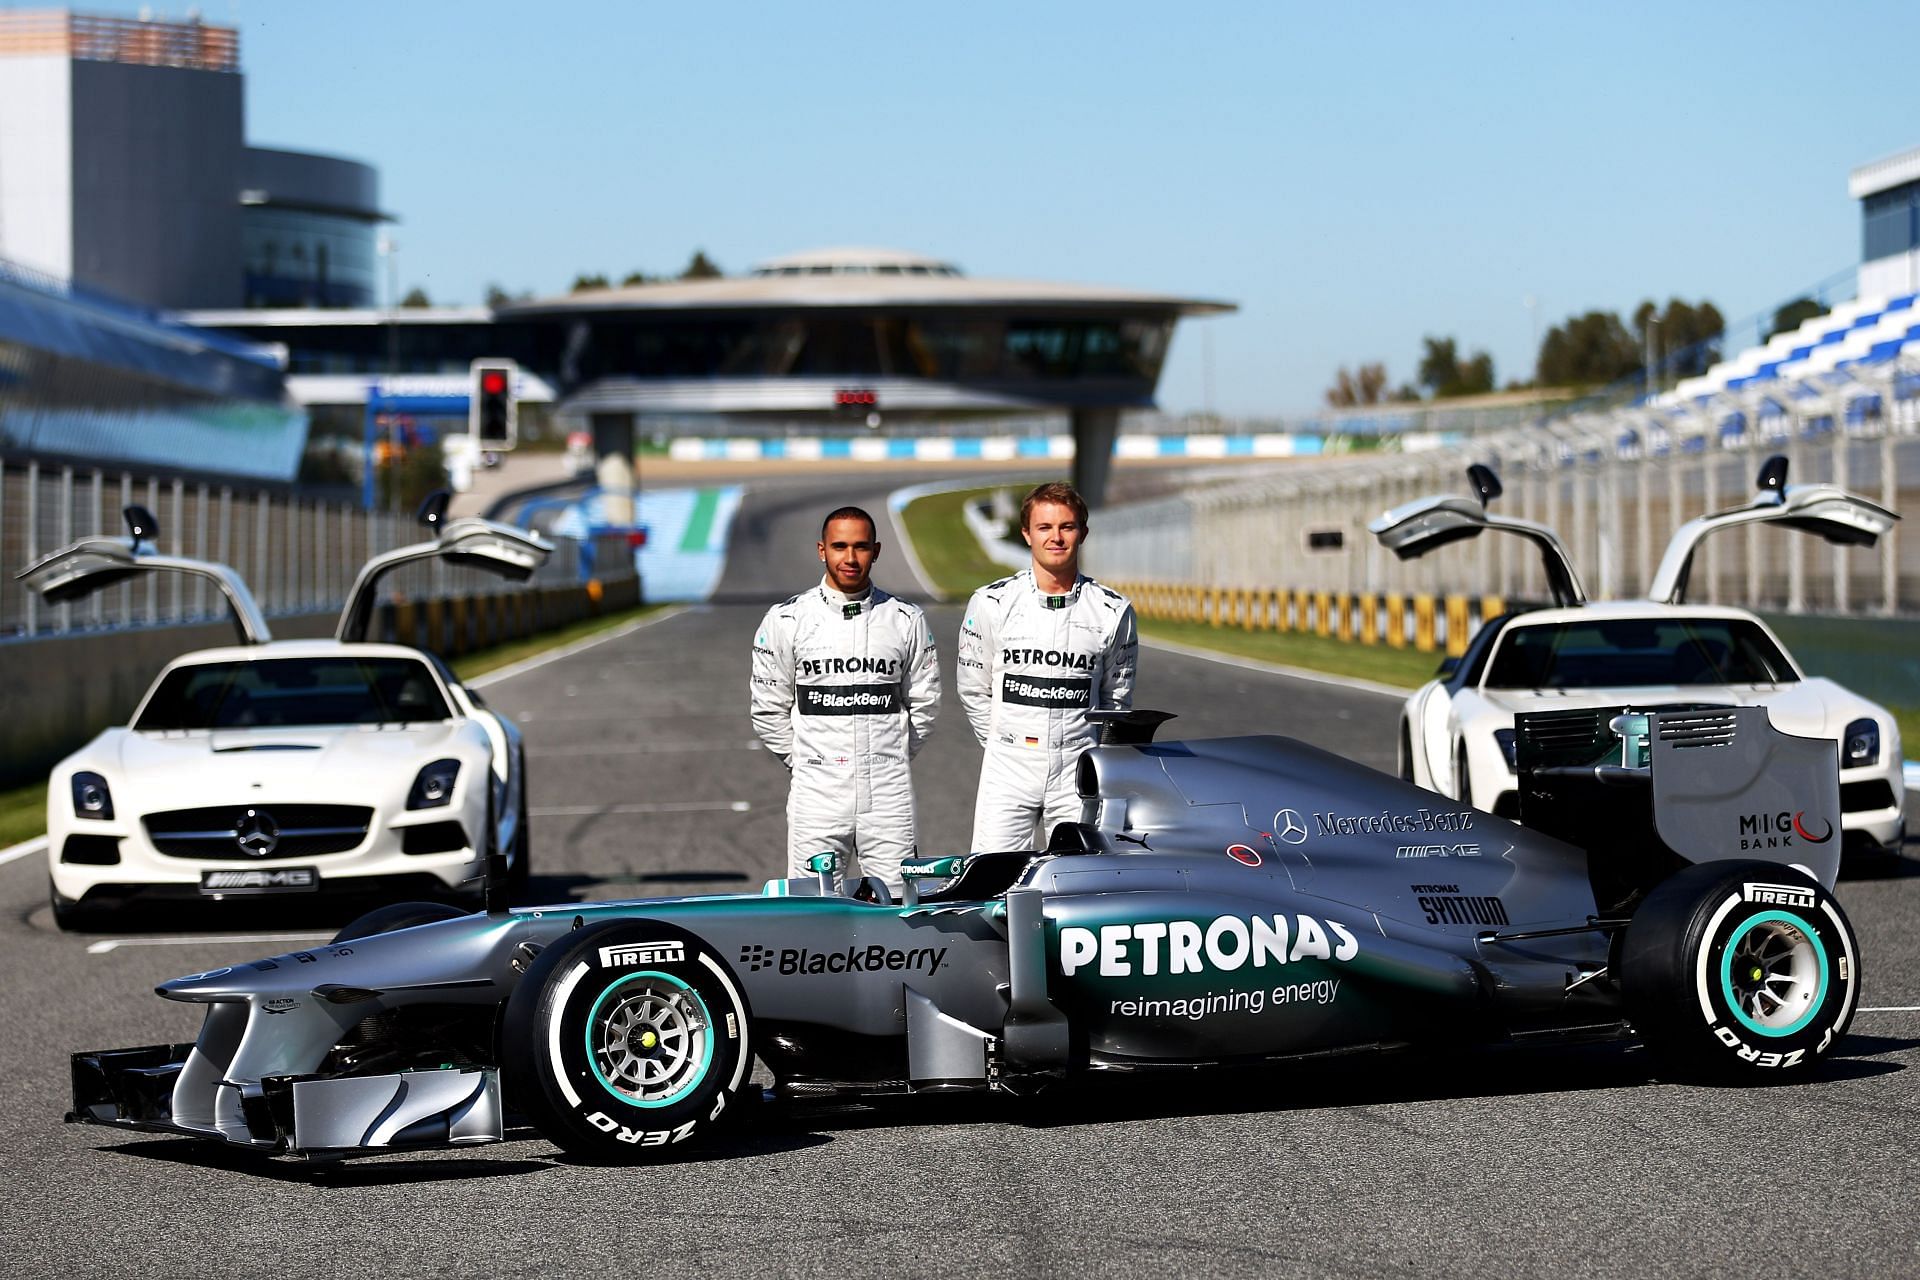 Mercedes GP F1 Launch - Lewis Hamilton (left) and Nico Rosberg (right) pair up for the 2013 season